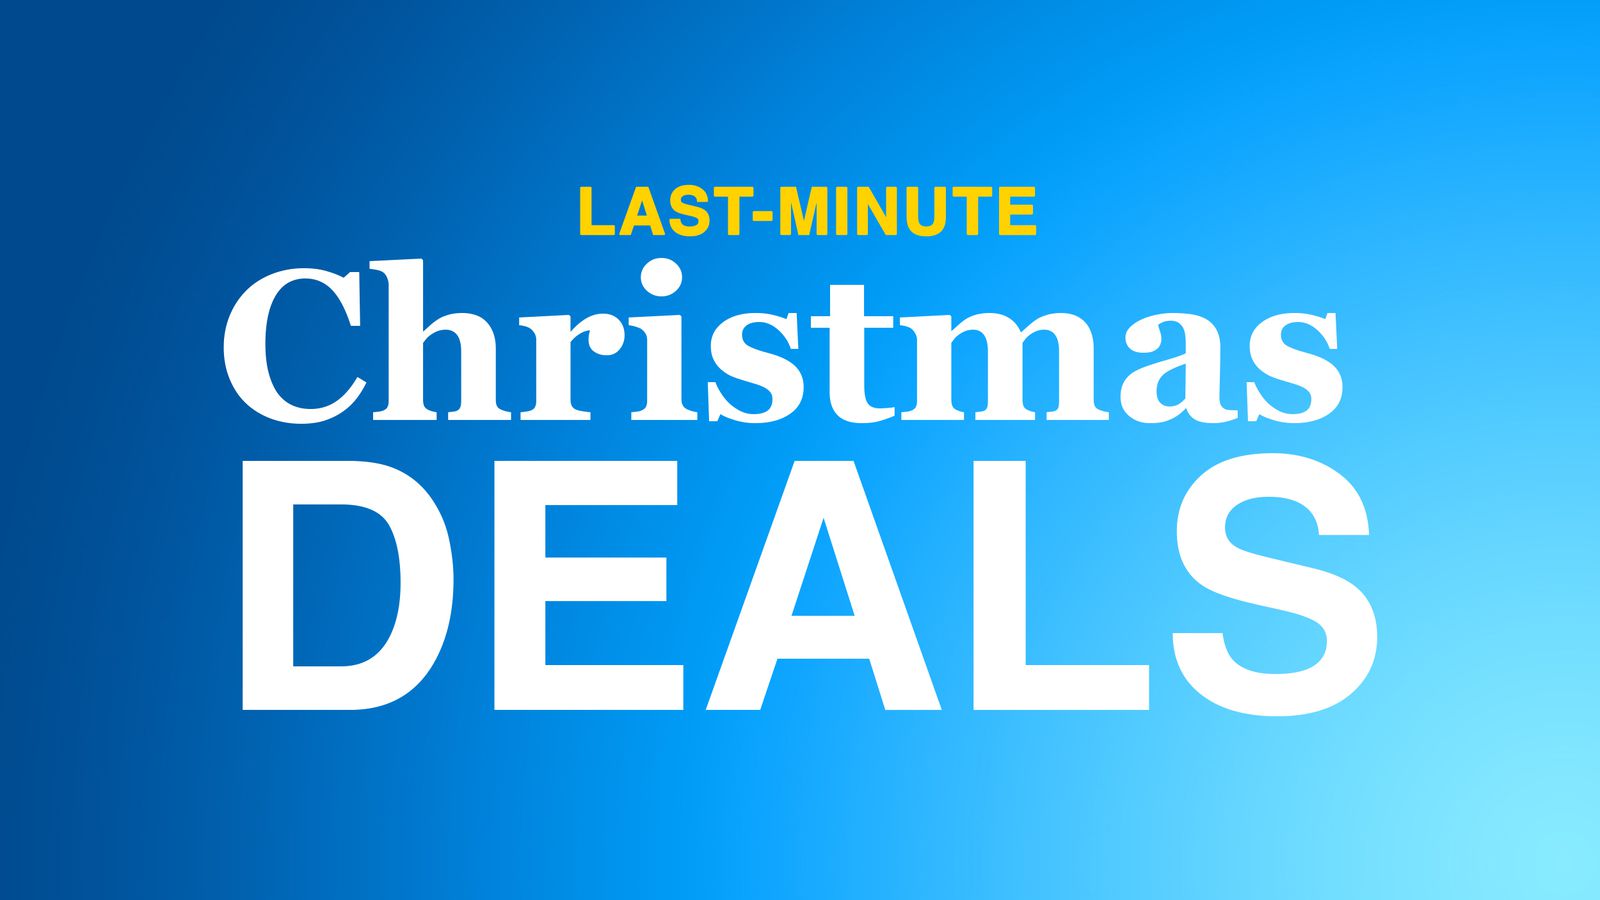 Last Minute Deals  Left your holiday shopping for the last minute? Well  played. You're right on time for tons of deals from brands you love. And  you won't even have to